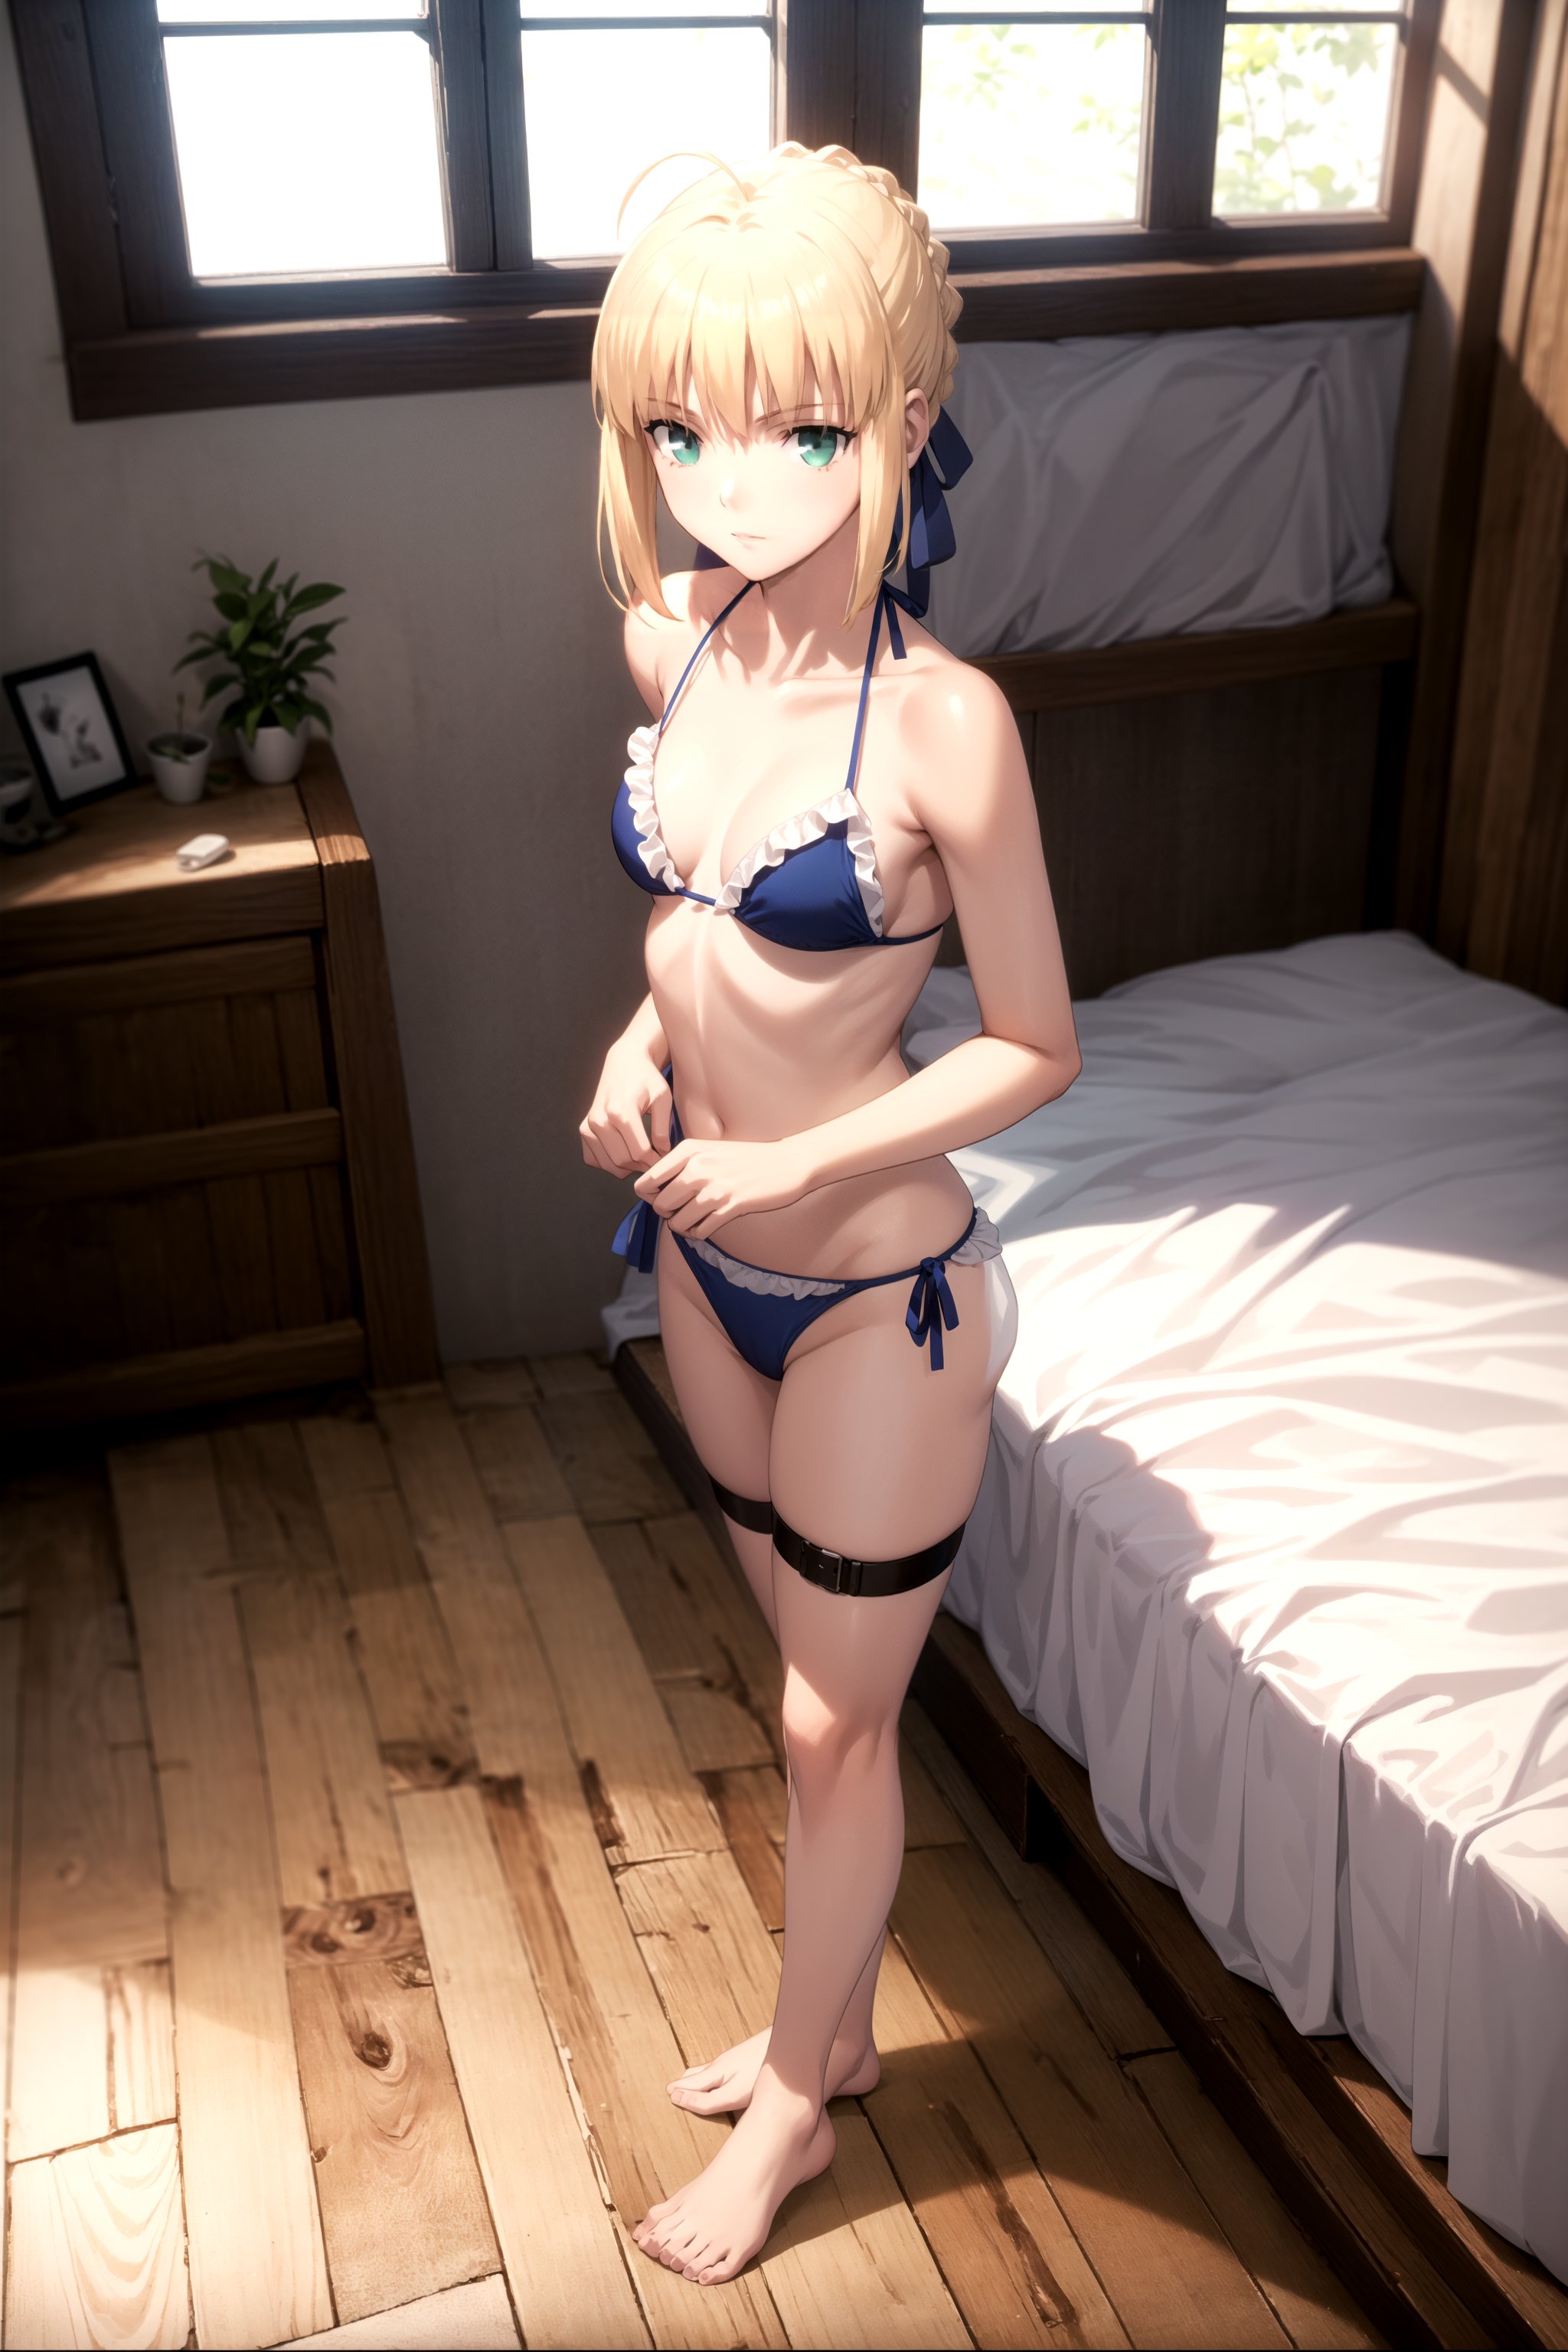 //Quality,
masterpiece, best quality
,//Character,
1girl, solo
,//Fashion,
,//Background,
collarbone, (indoors, window, wooden floor, bed), 
,//Others,
,phSaber, phAltoria, blue micro_bikini, thigh_straps, hair down, blurry, frills, closer_view, looking-at-viewer